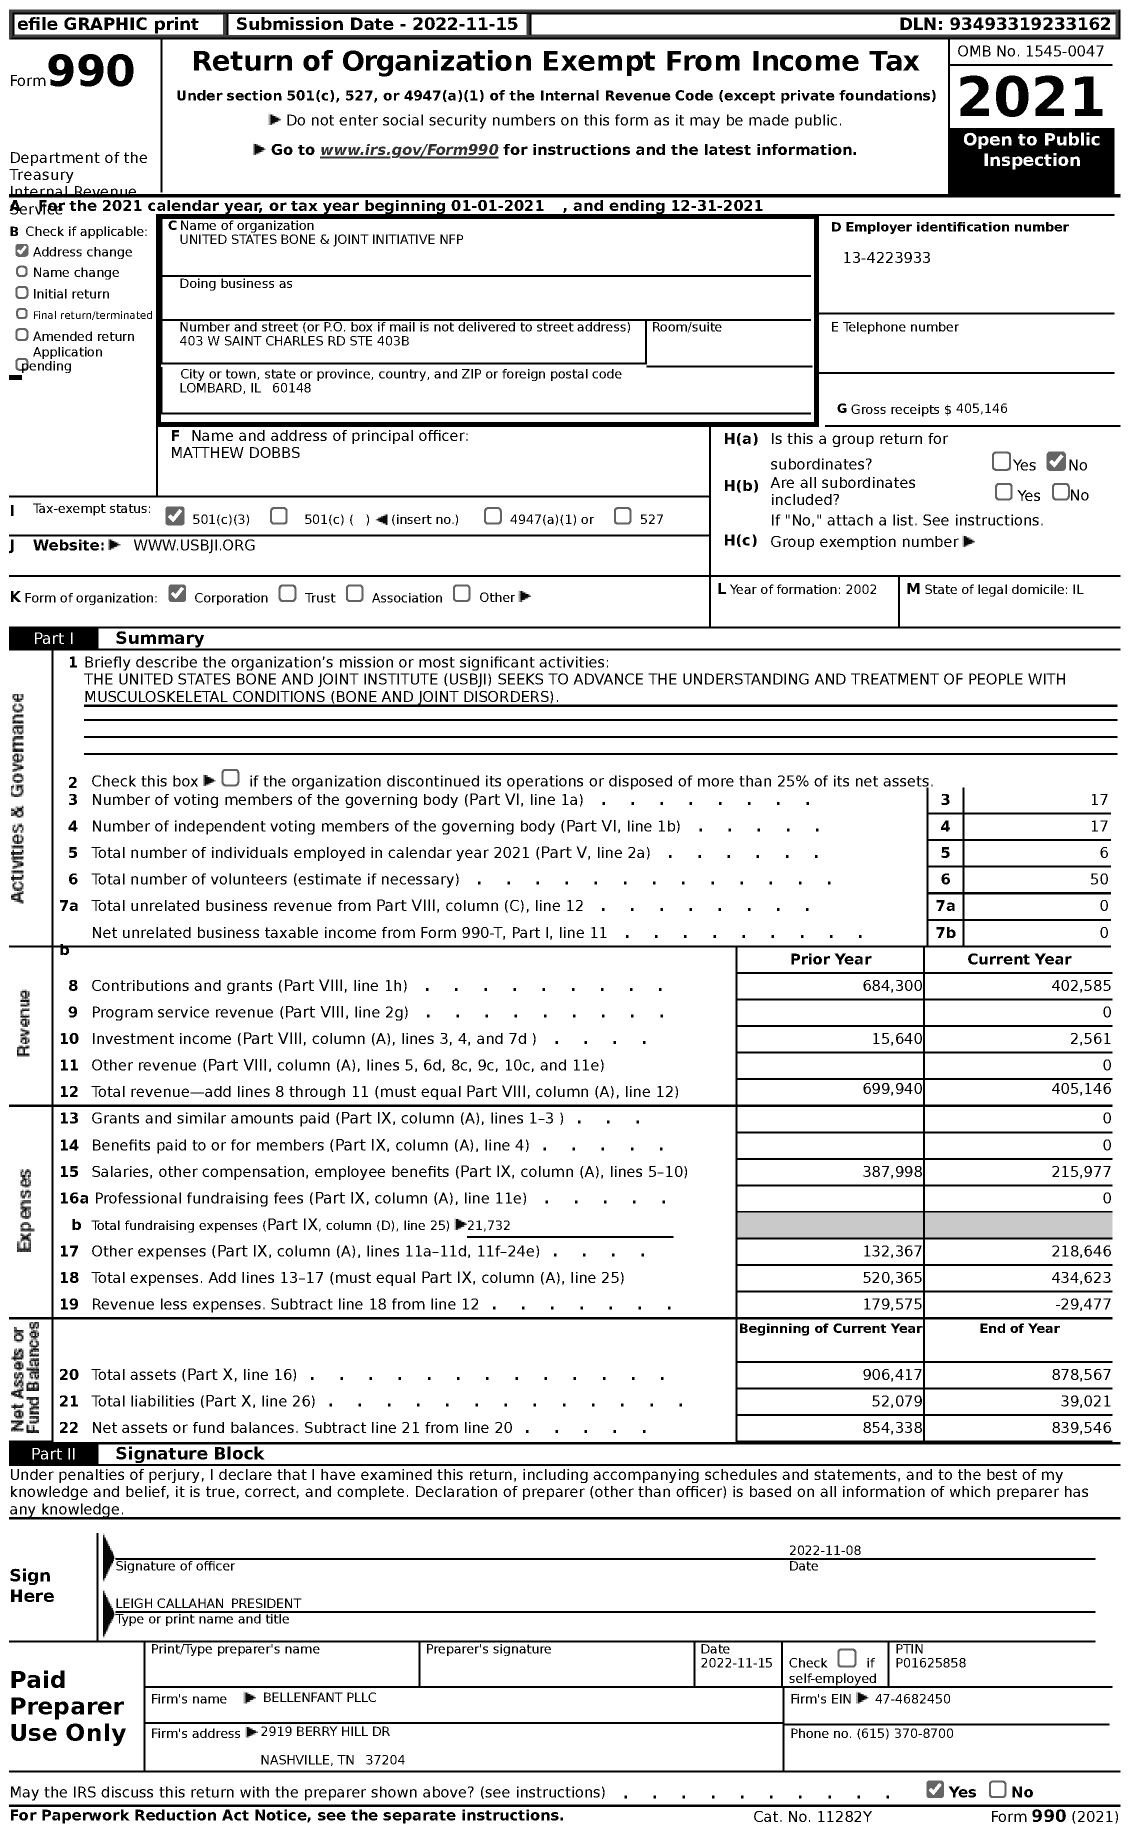 Image of first page of 2021 Form 990 for United States Bone And Joint Initiative NFP